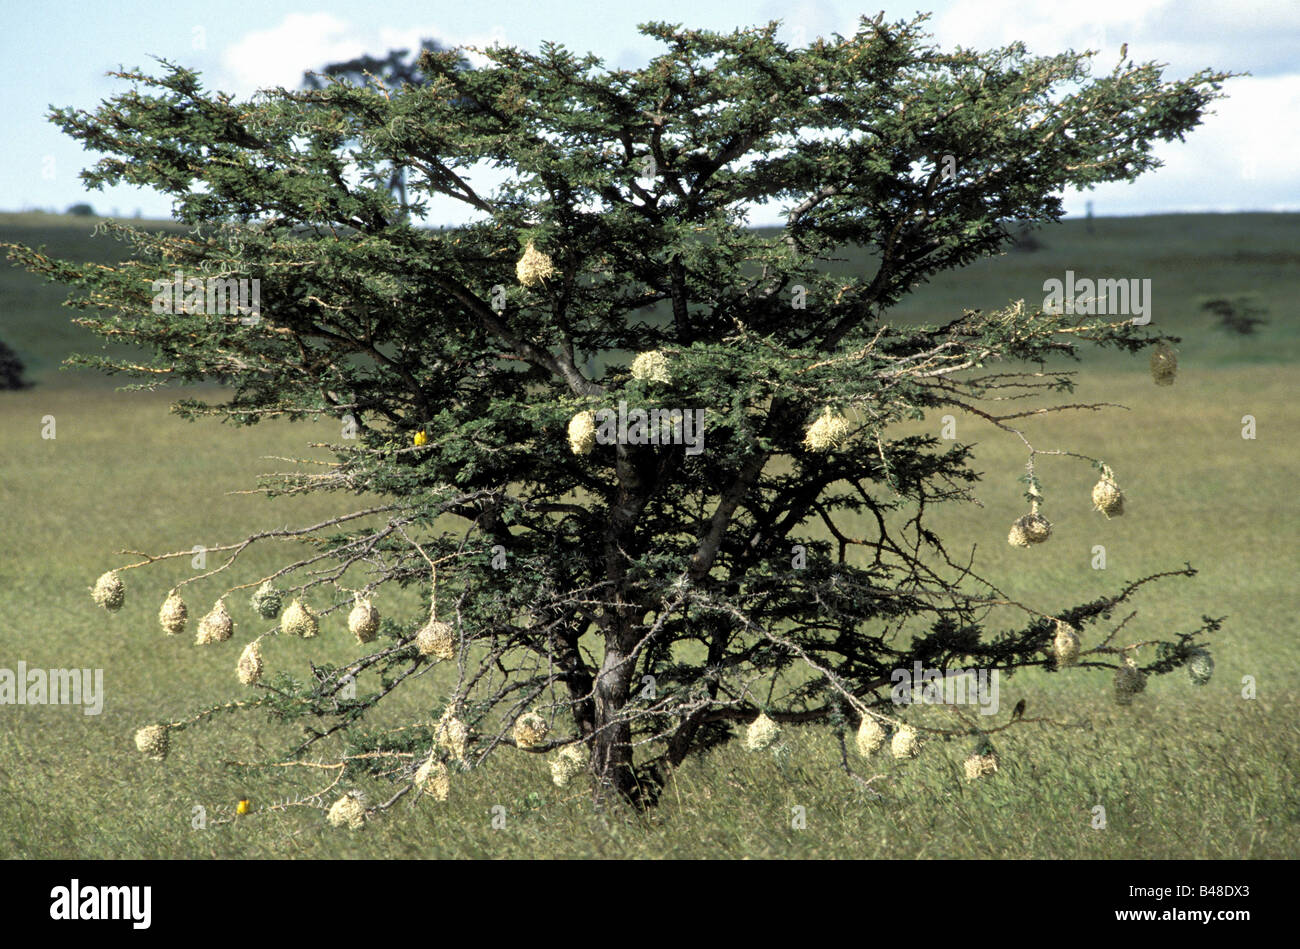 zoology / animals, avian / bird, Widowbirds, (Ploceidae), tree with nests, Masai Mara, Kenya, distribution: Africa, Australia, Europe, Asia, Additional-Rights-Clearance-Info-Not-Available Stock Photo